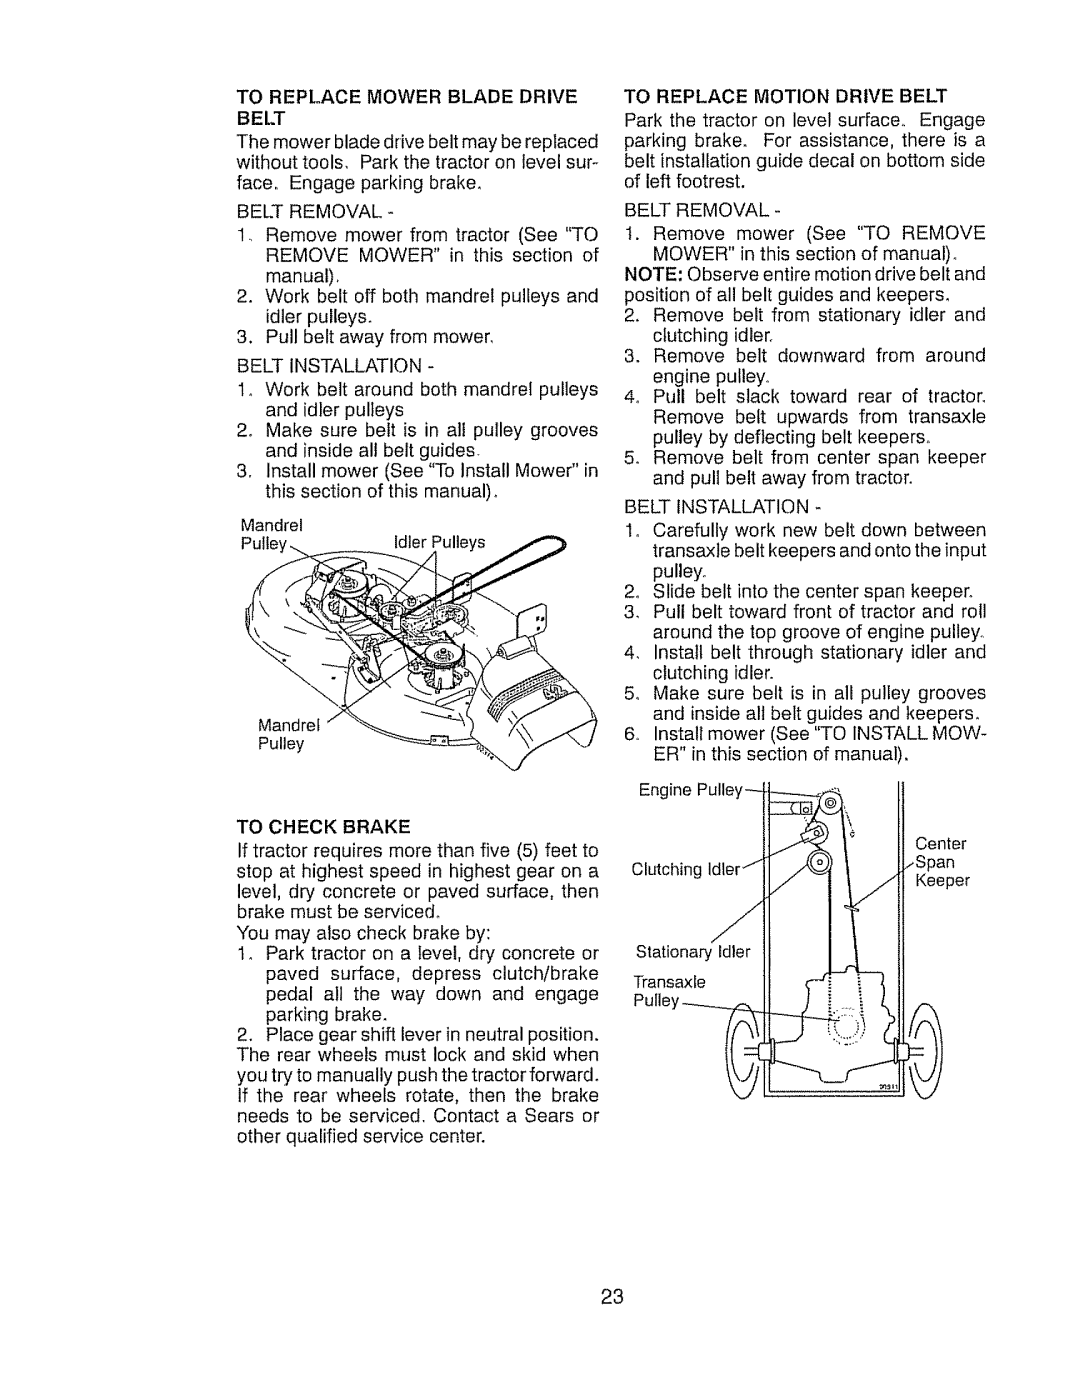 Craftsman 917.289030, 917.289031 owner manual To Replace Mower Blade Drive Belt 